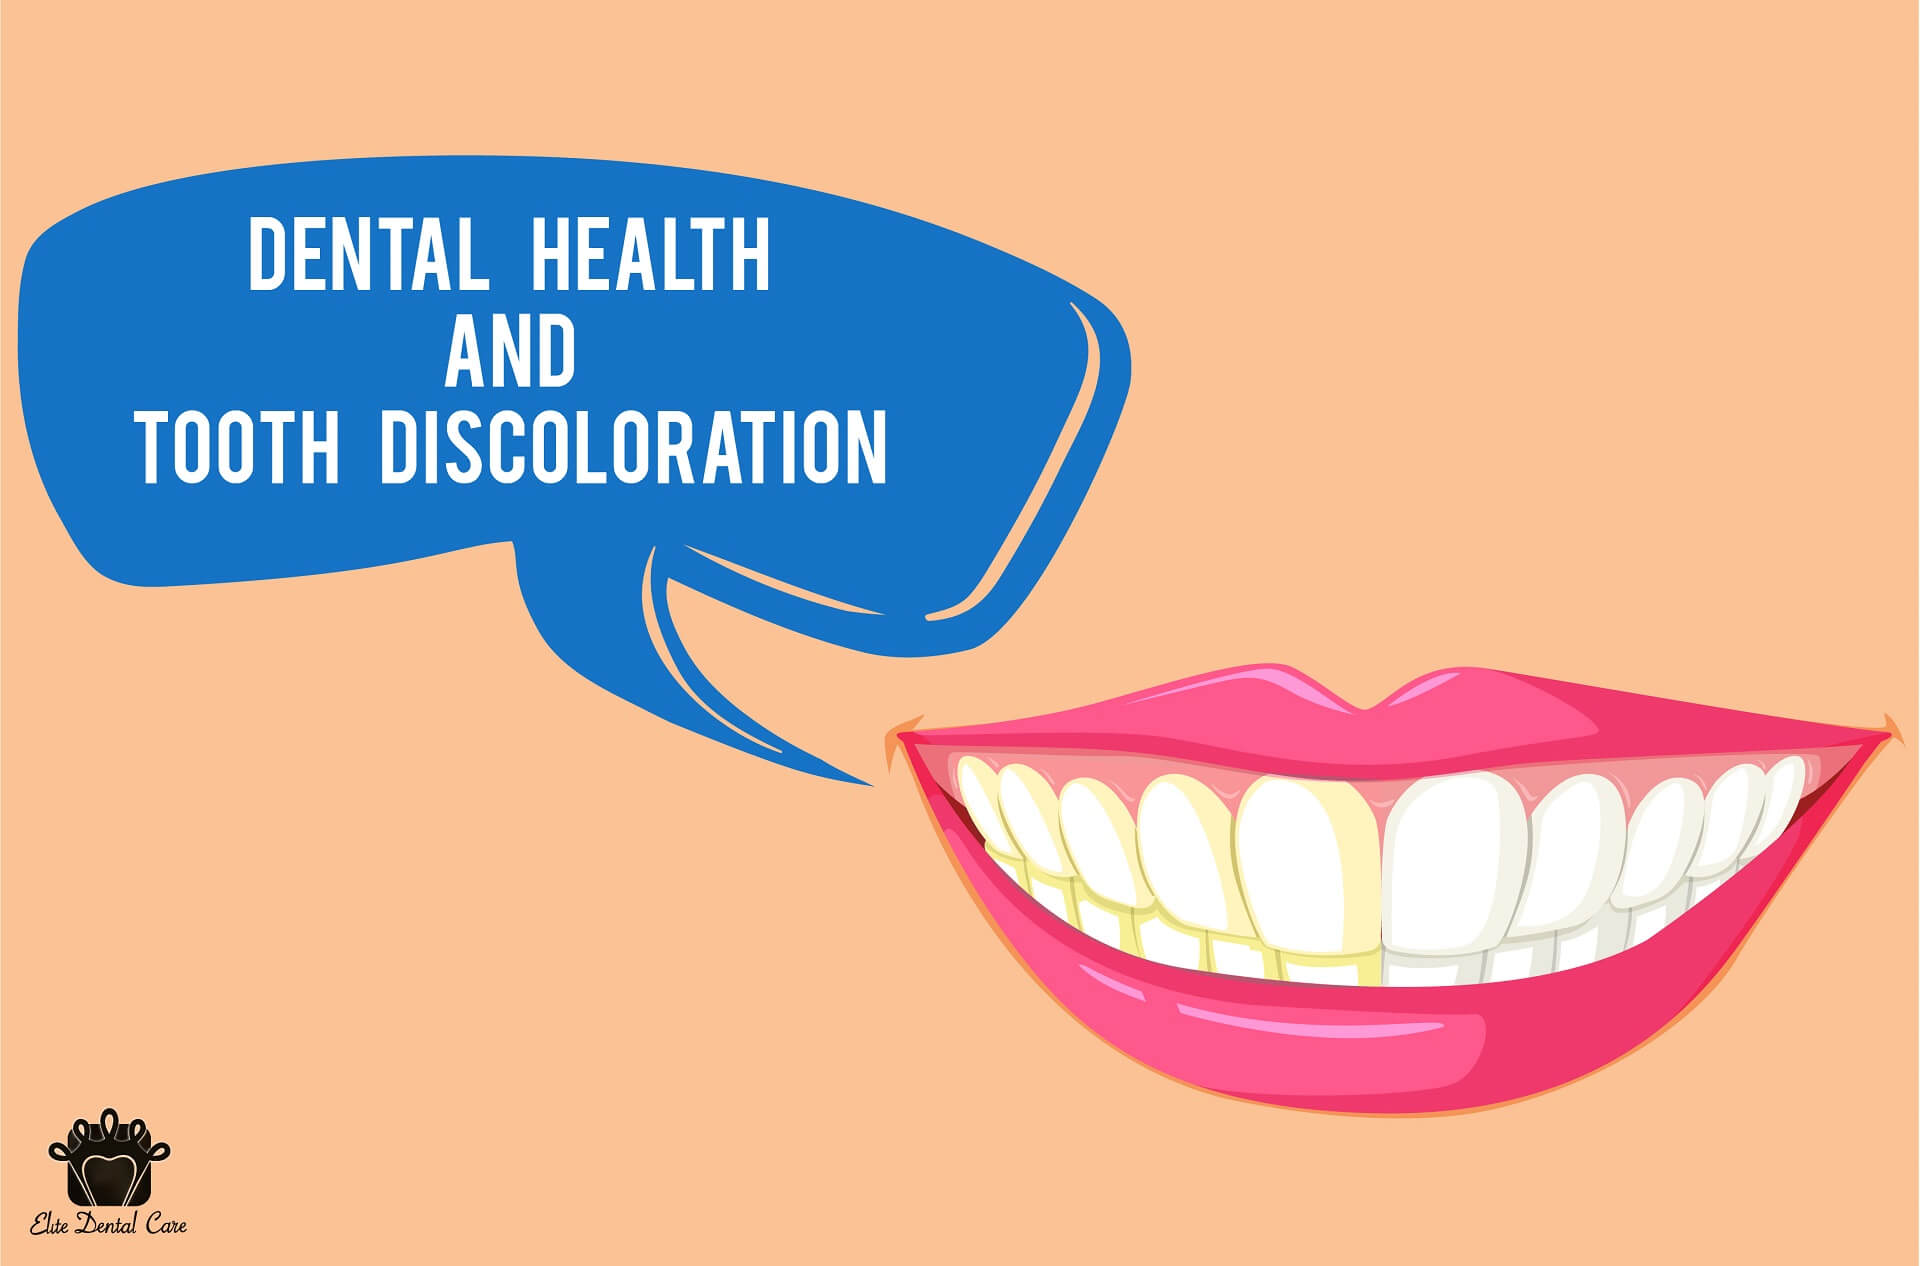 Dental health and tooth discoloration